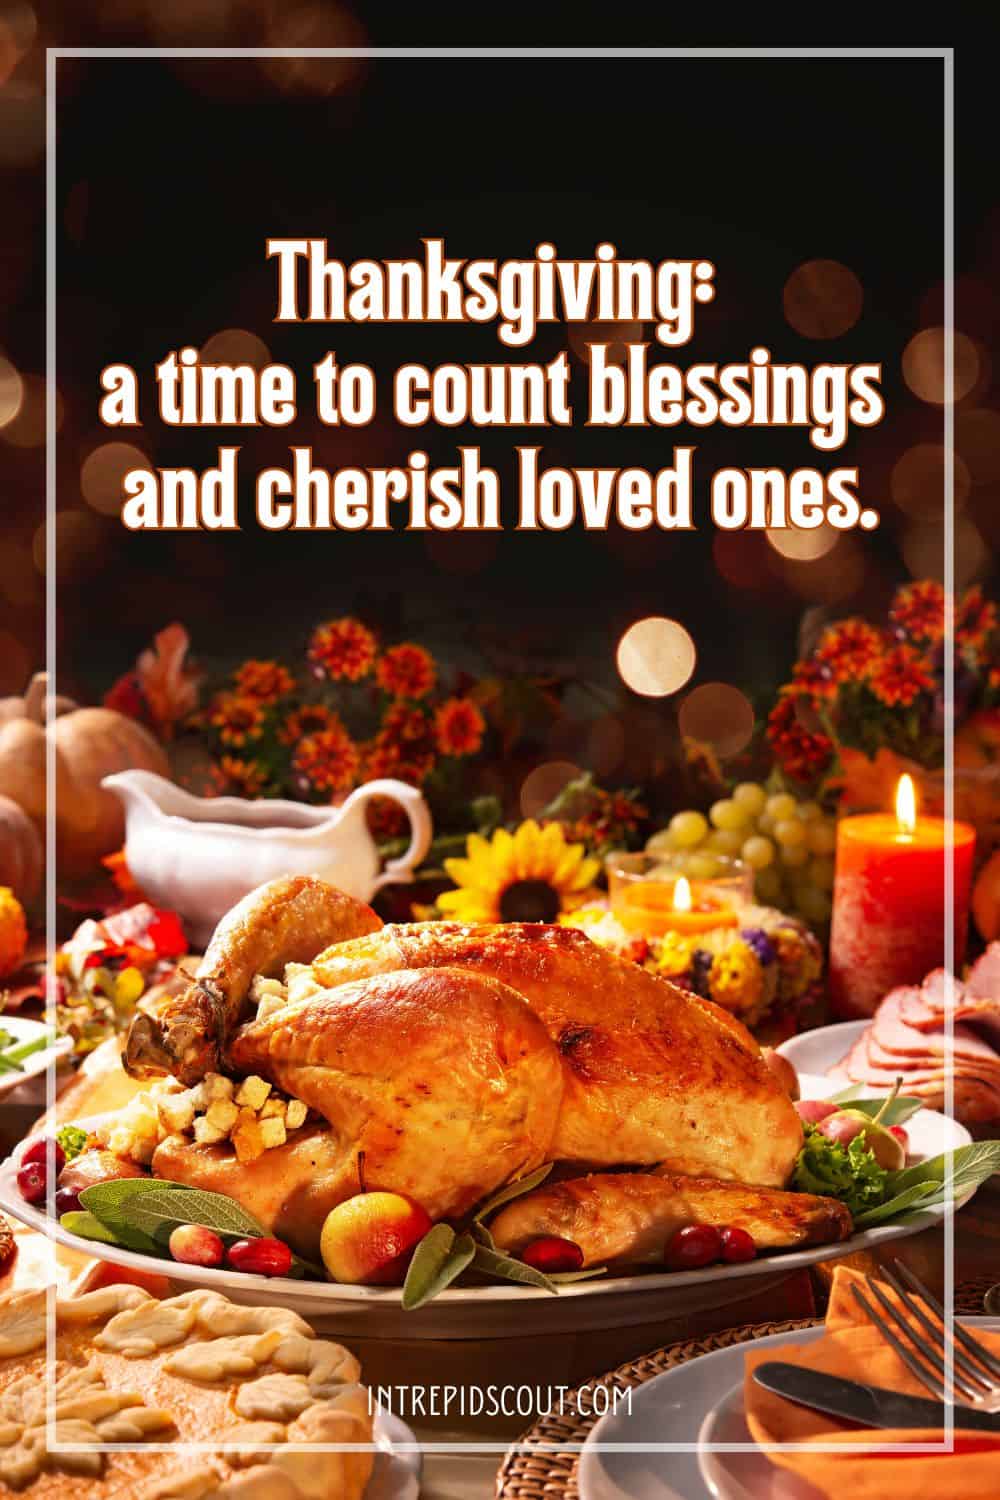 Thanksgiving Day Captions and Quotes